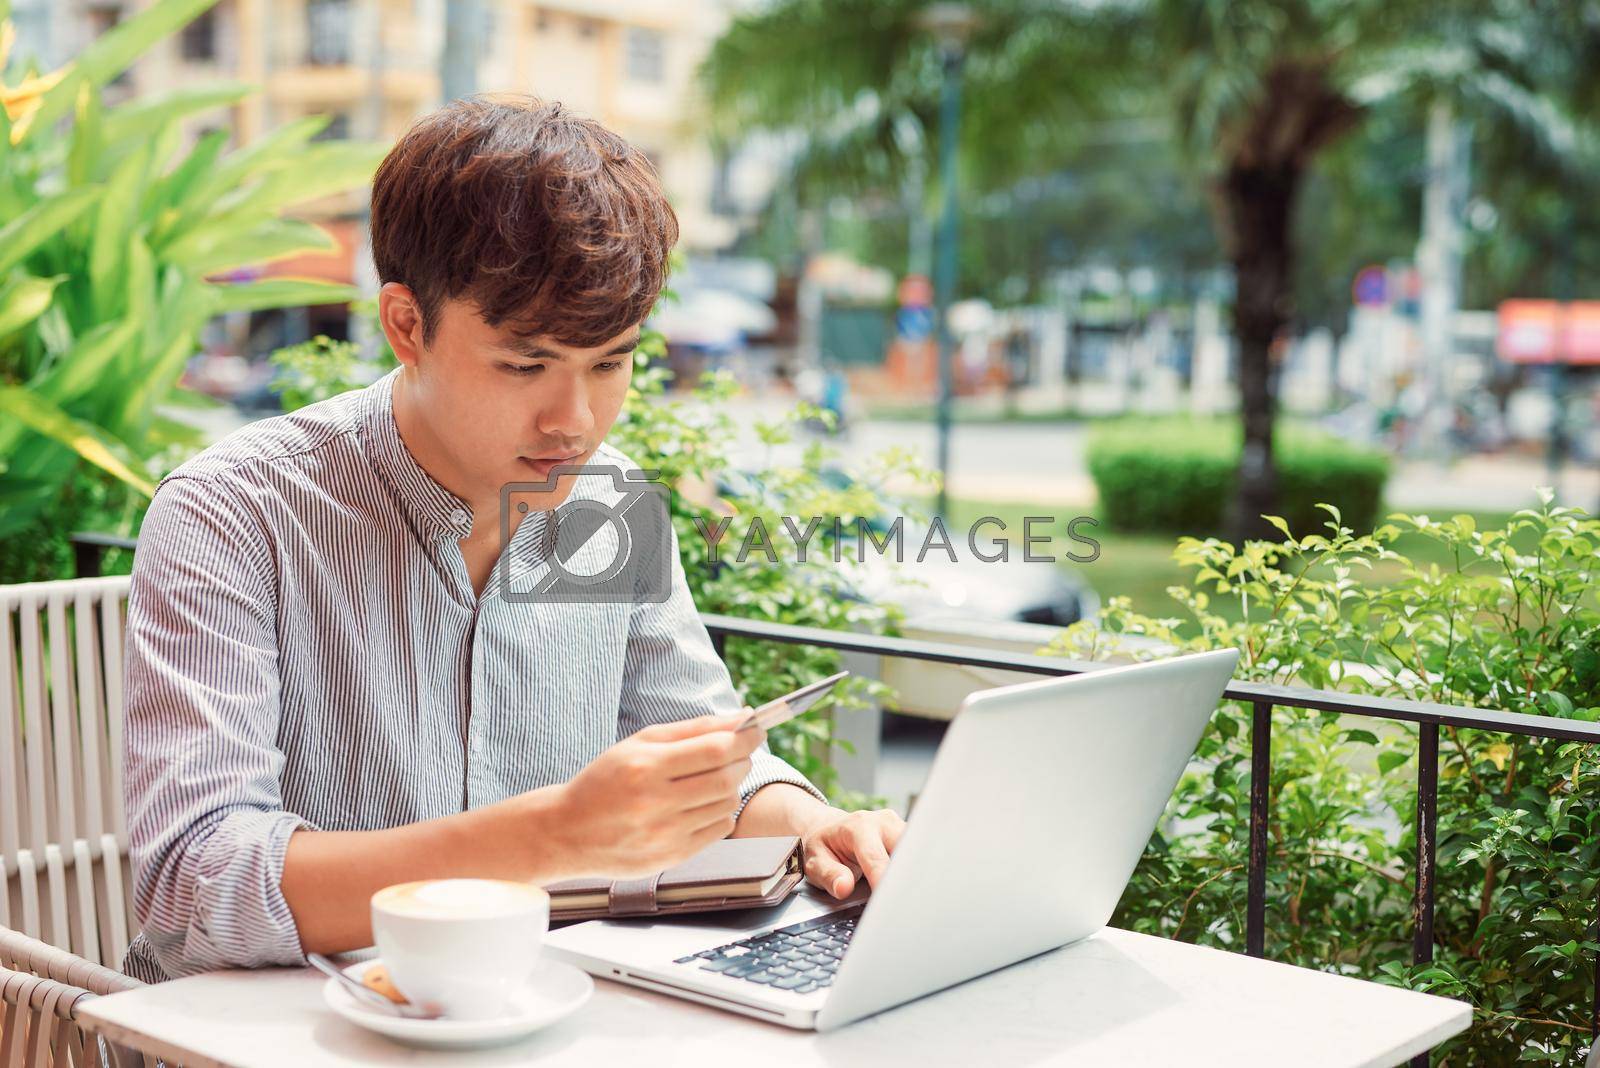 Royalty free image of Relaxed man writing in a laptop in a coffee shop by makidotvn